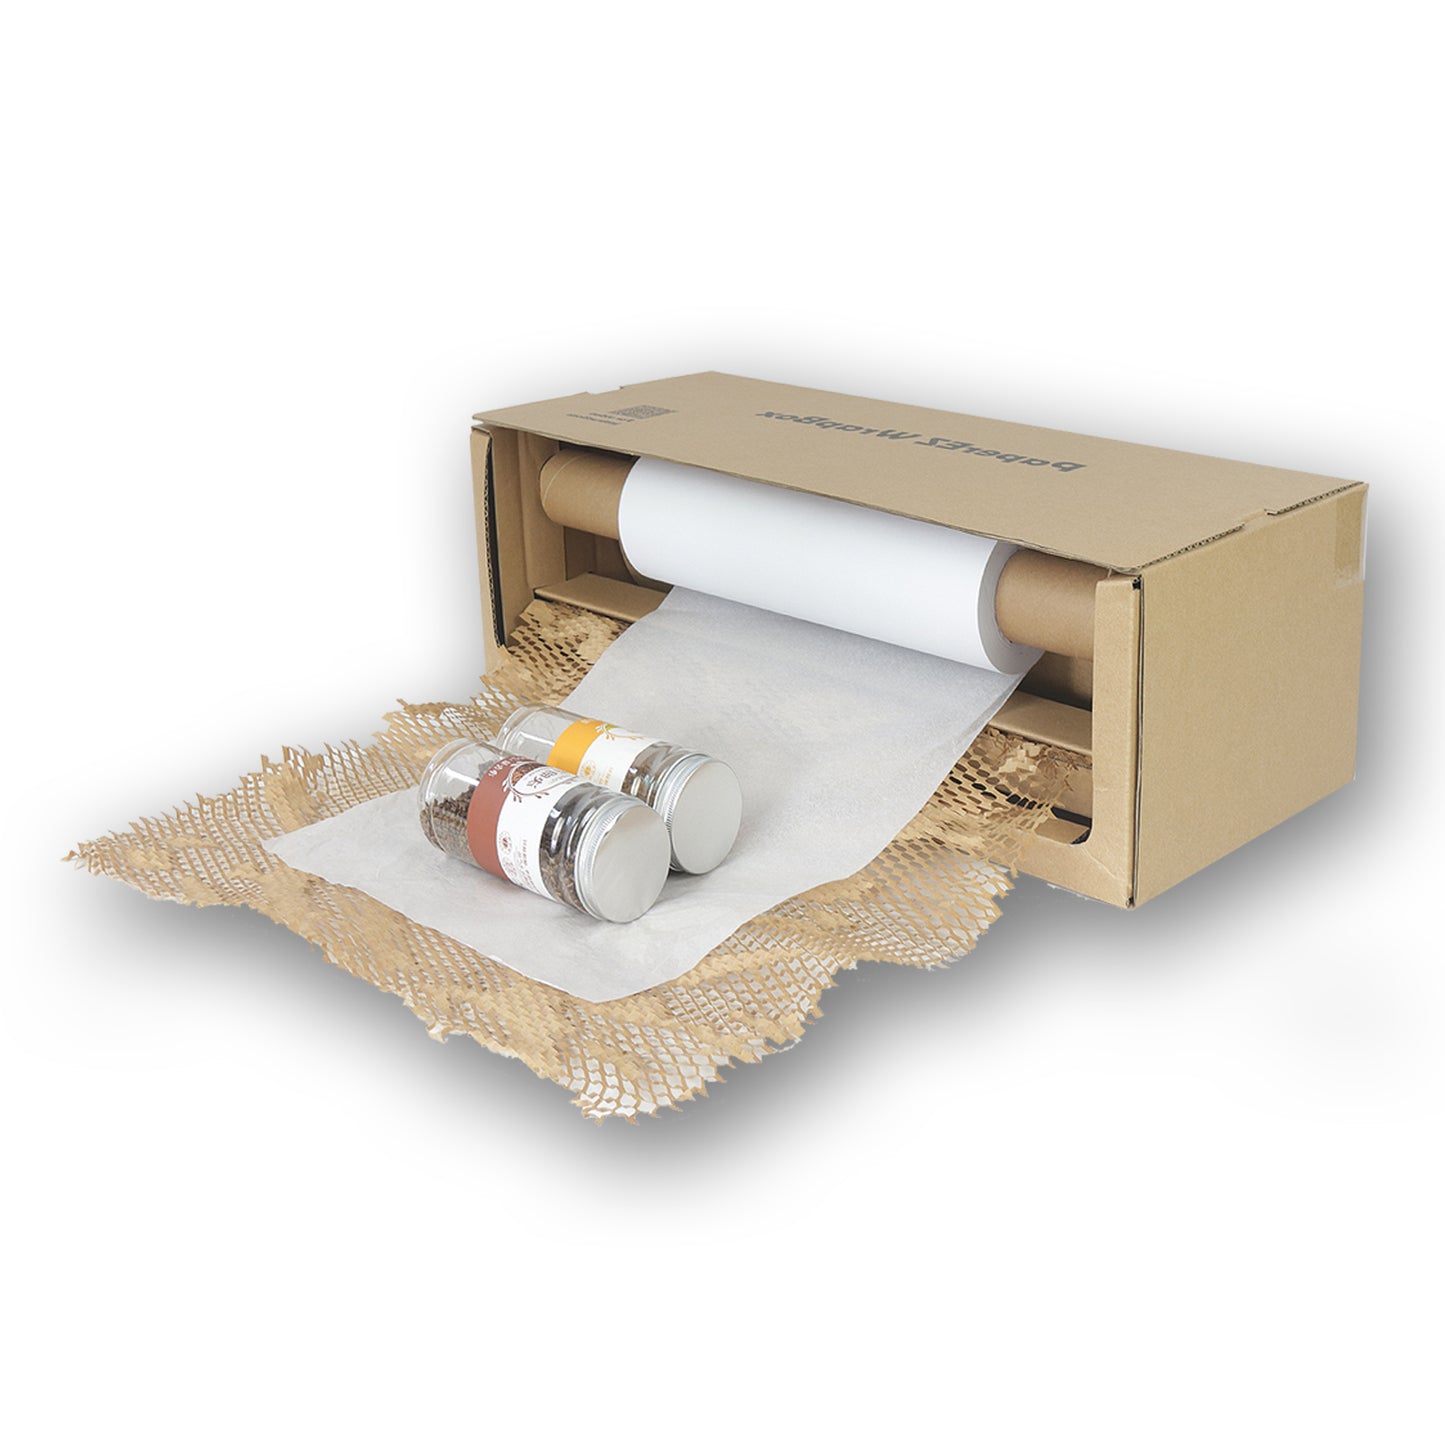  Protective Packaging Materials